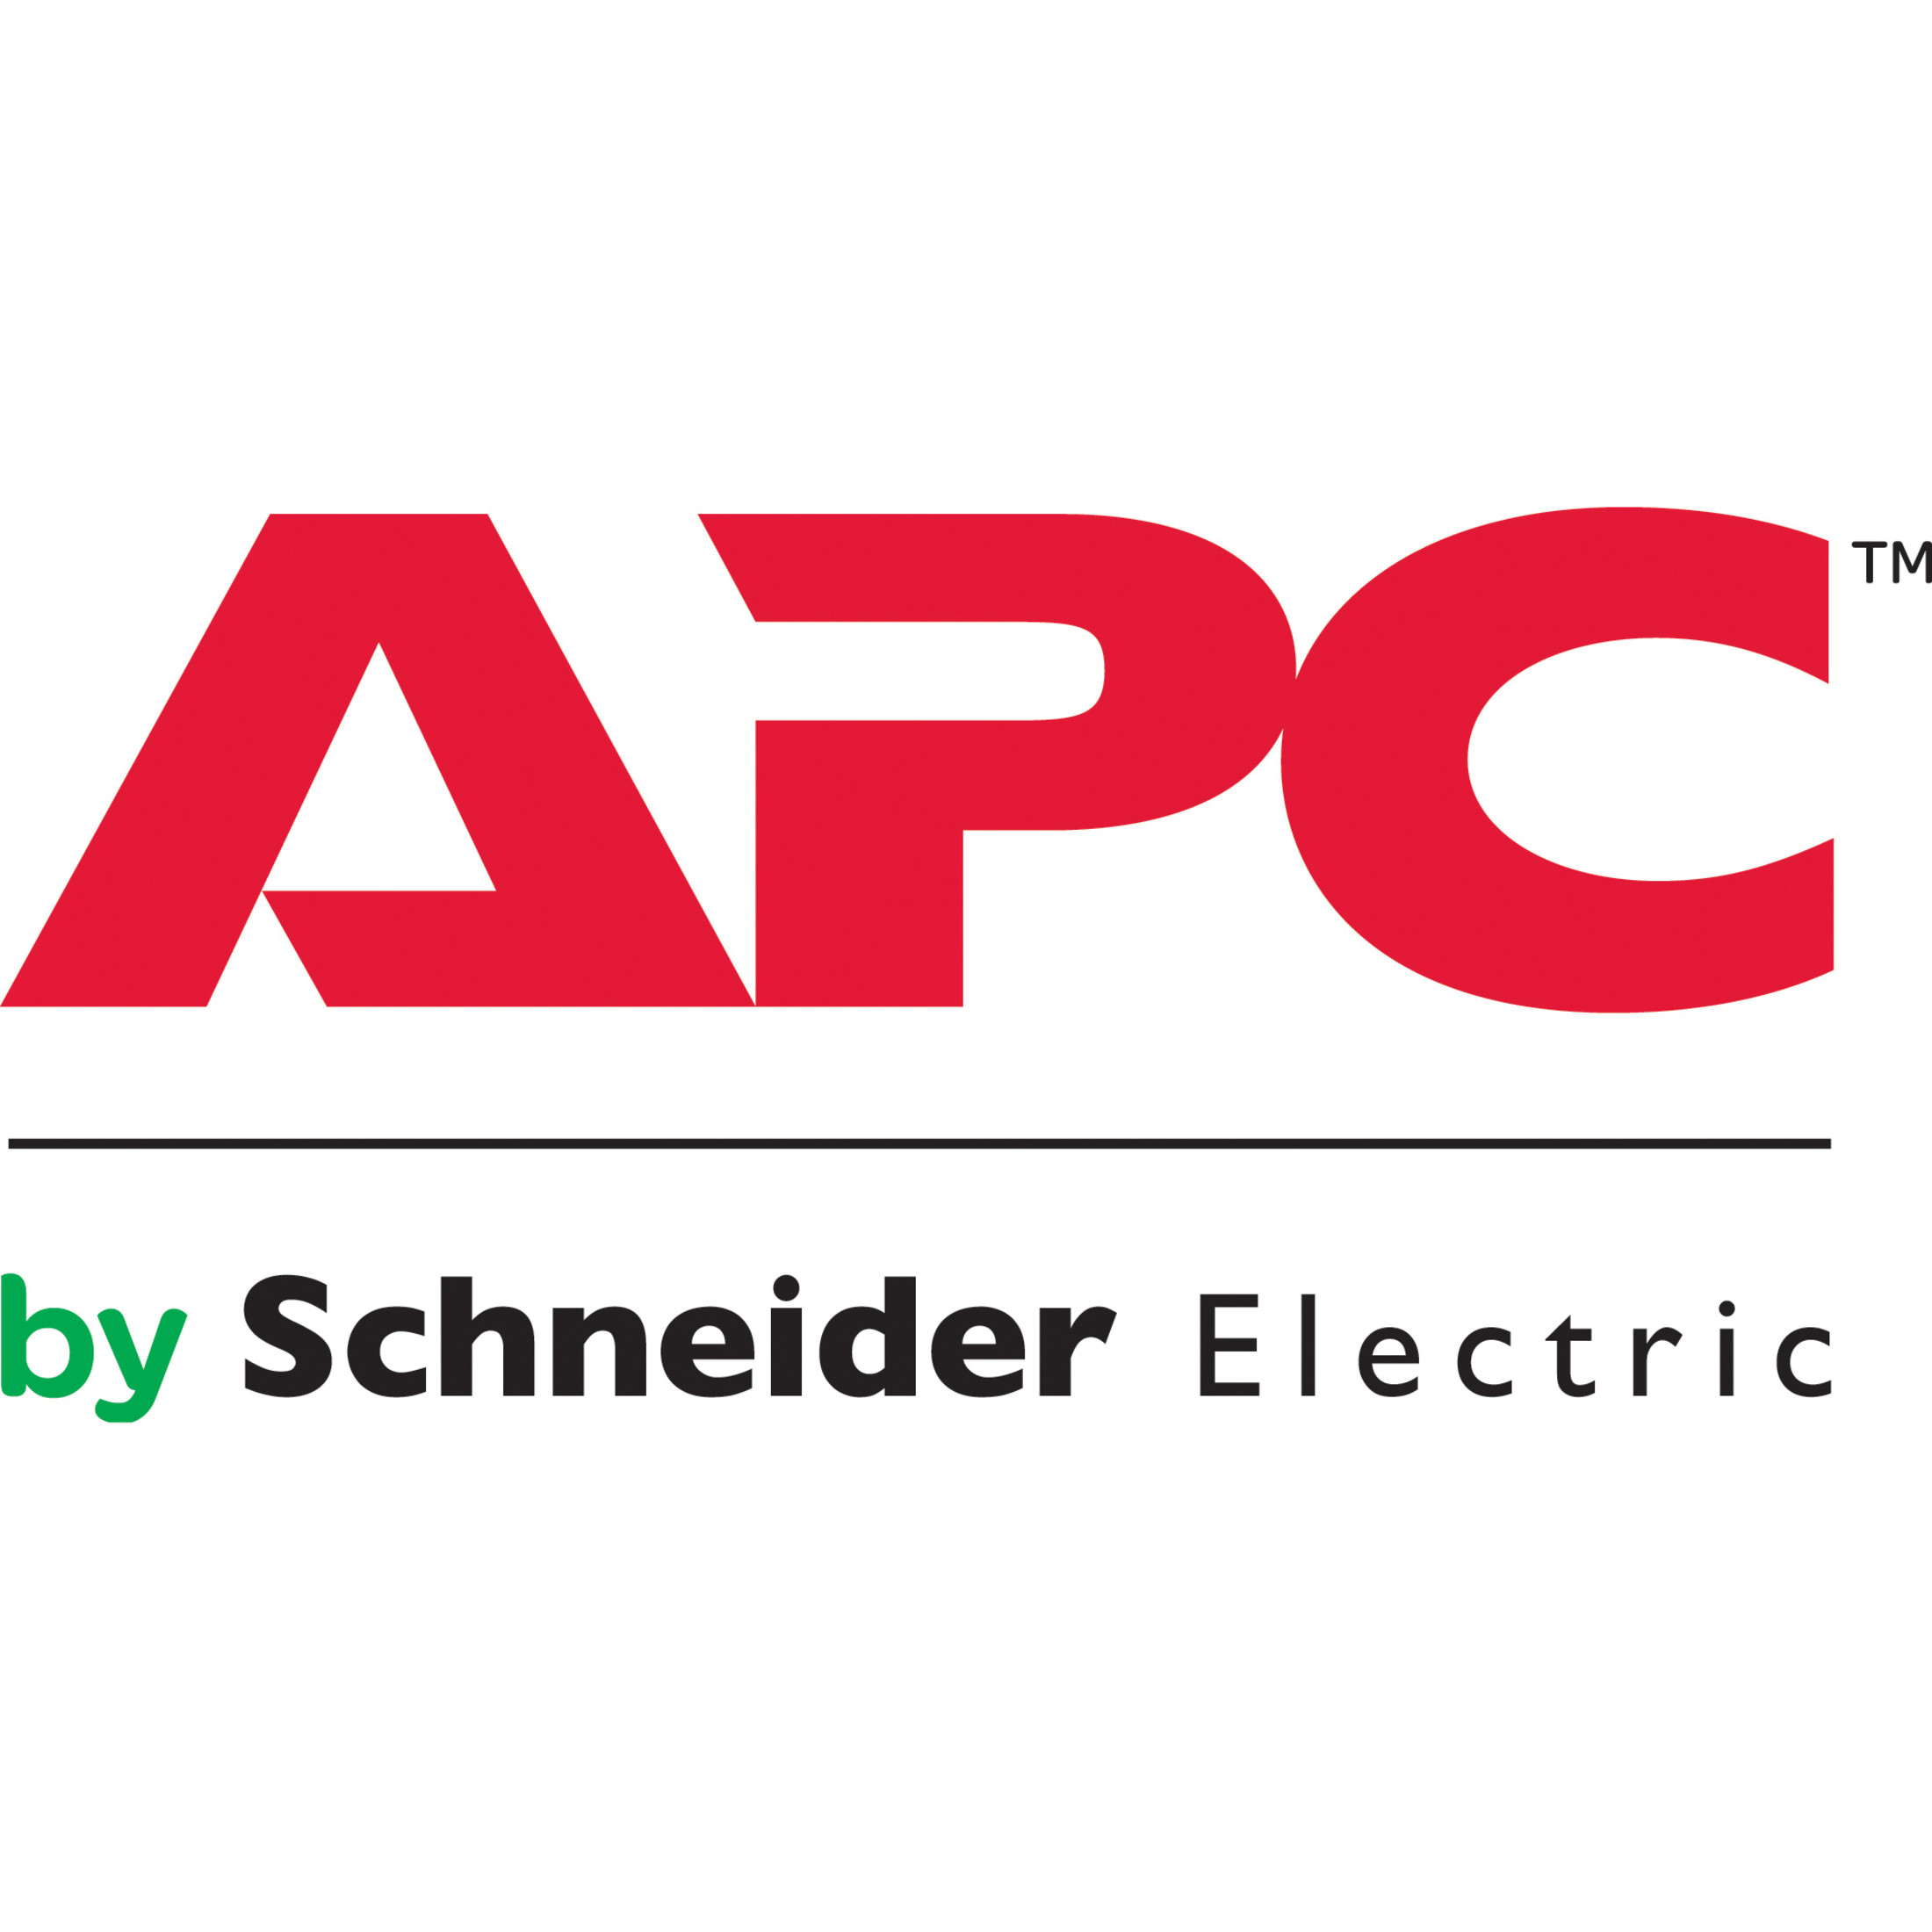 APC by Schneider Electric Start-Up Service5 HourService8 x 5Installation and Startup WSTRTUP-VS1-A15